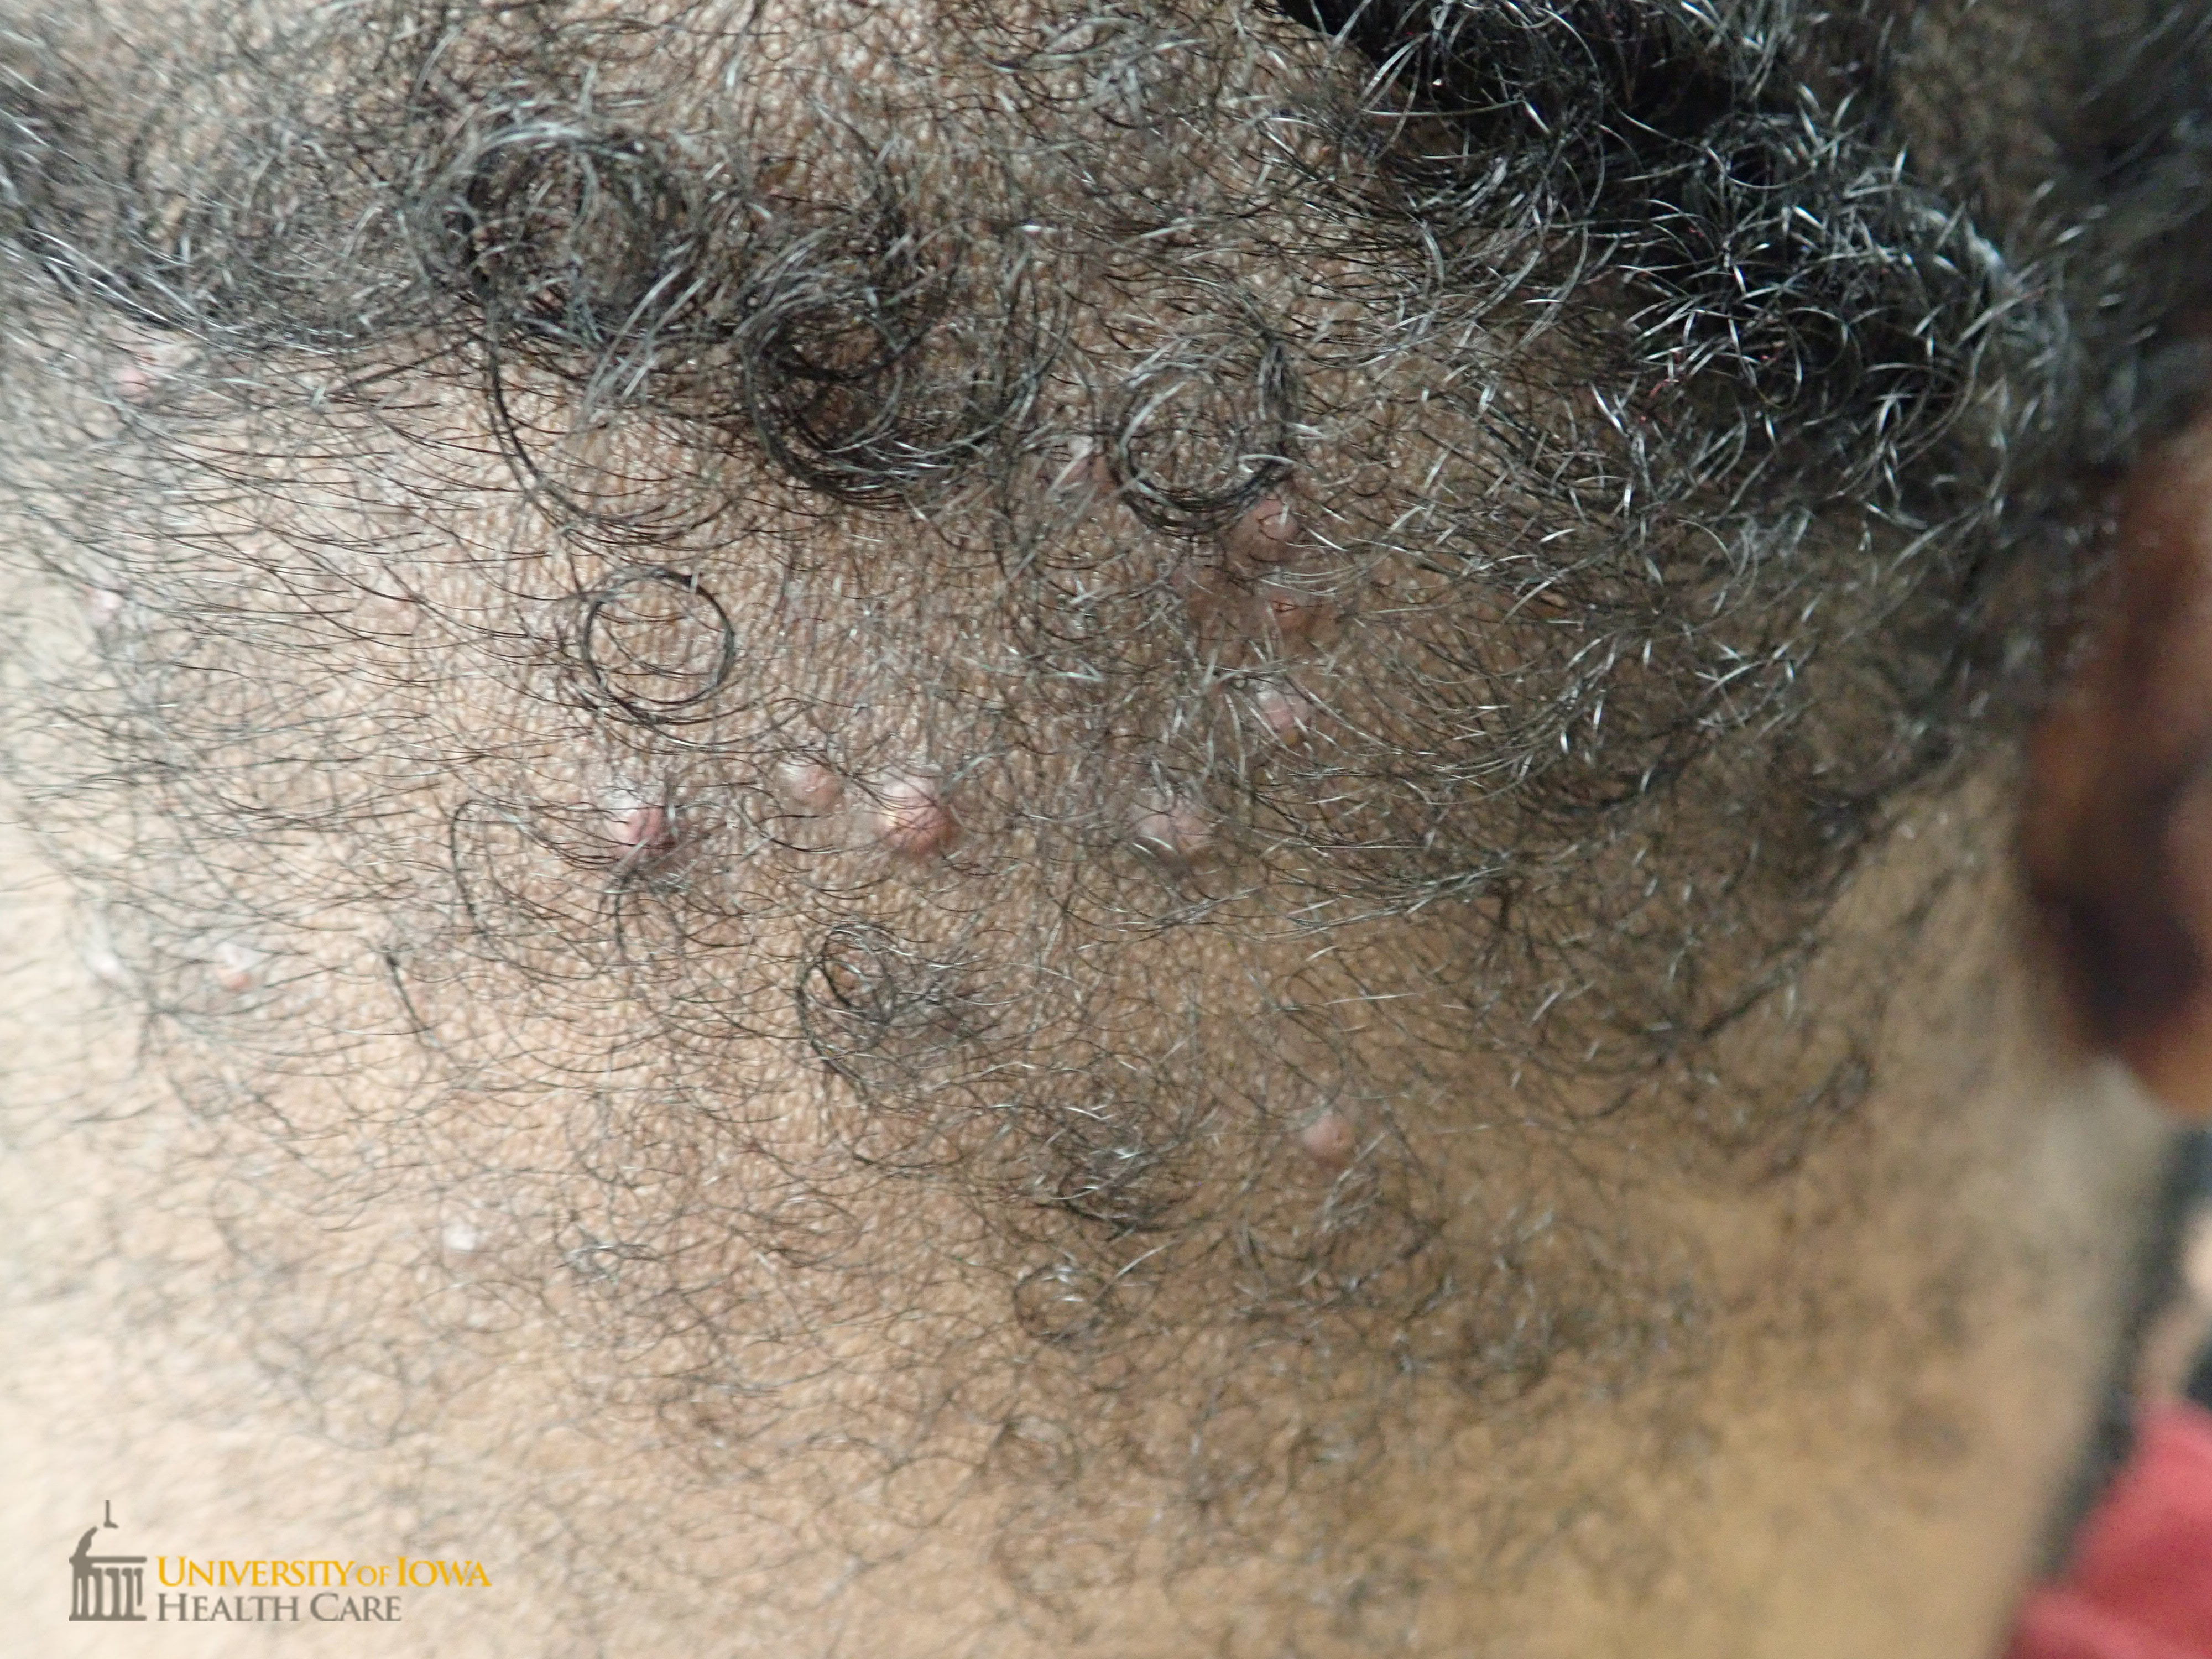 Grouped pink keloidal papules on the occipital scalp. (click images for higher resolution).